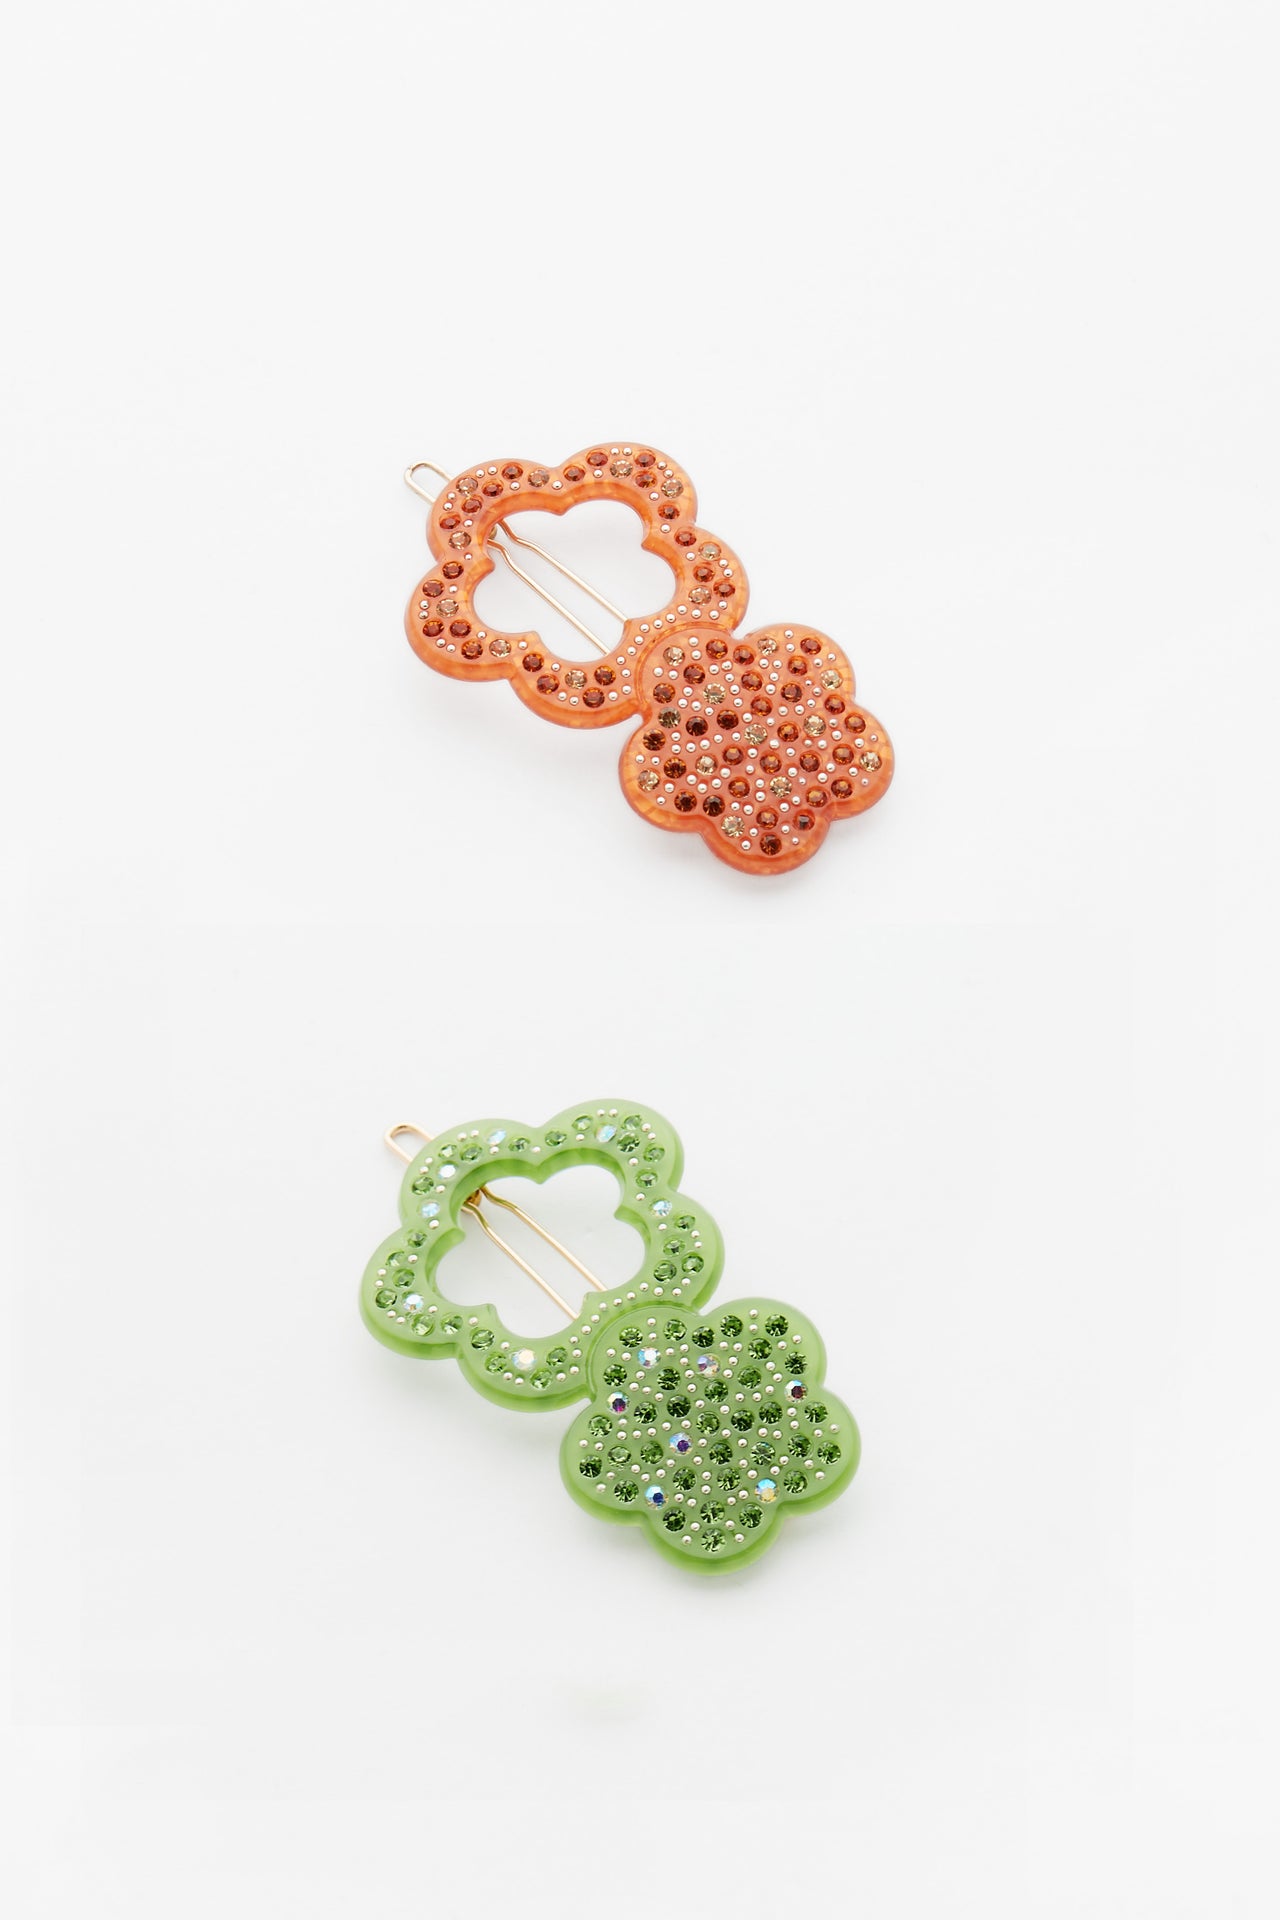 Dolly Clips in Orange and Green